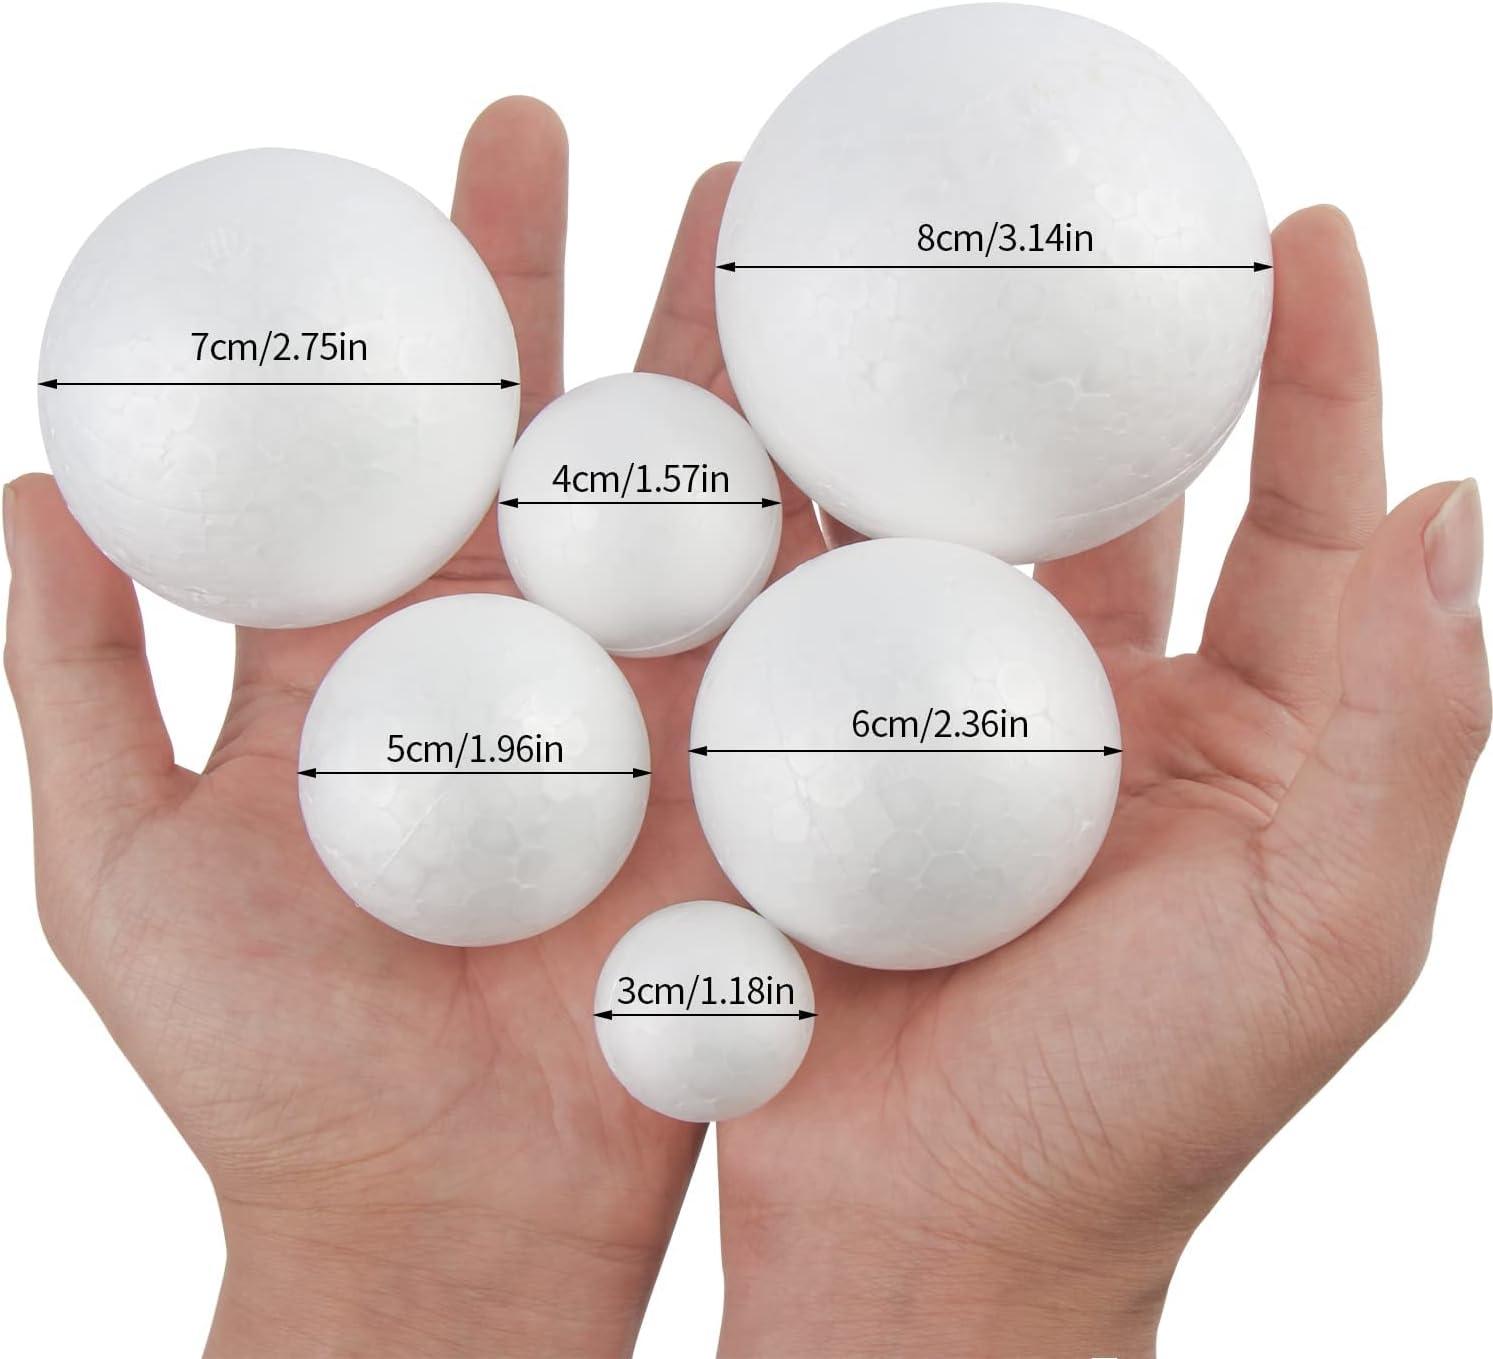 6 Inch Foam Polystyrene Balls for Art & Crafts Projects (4 Piece Set)